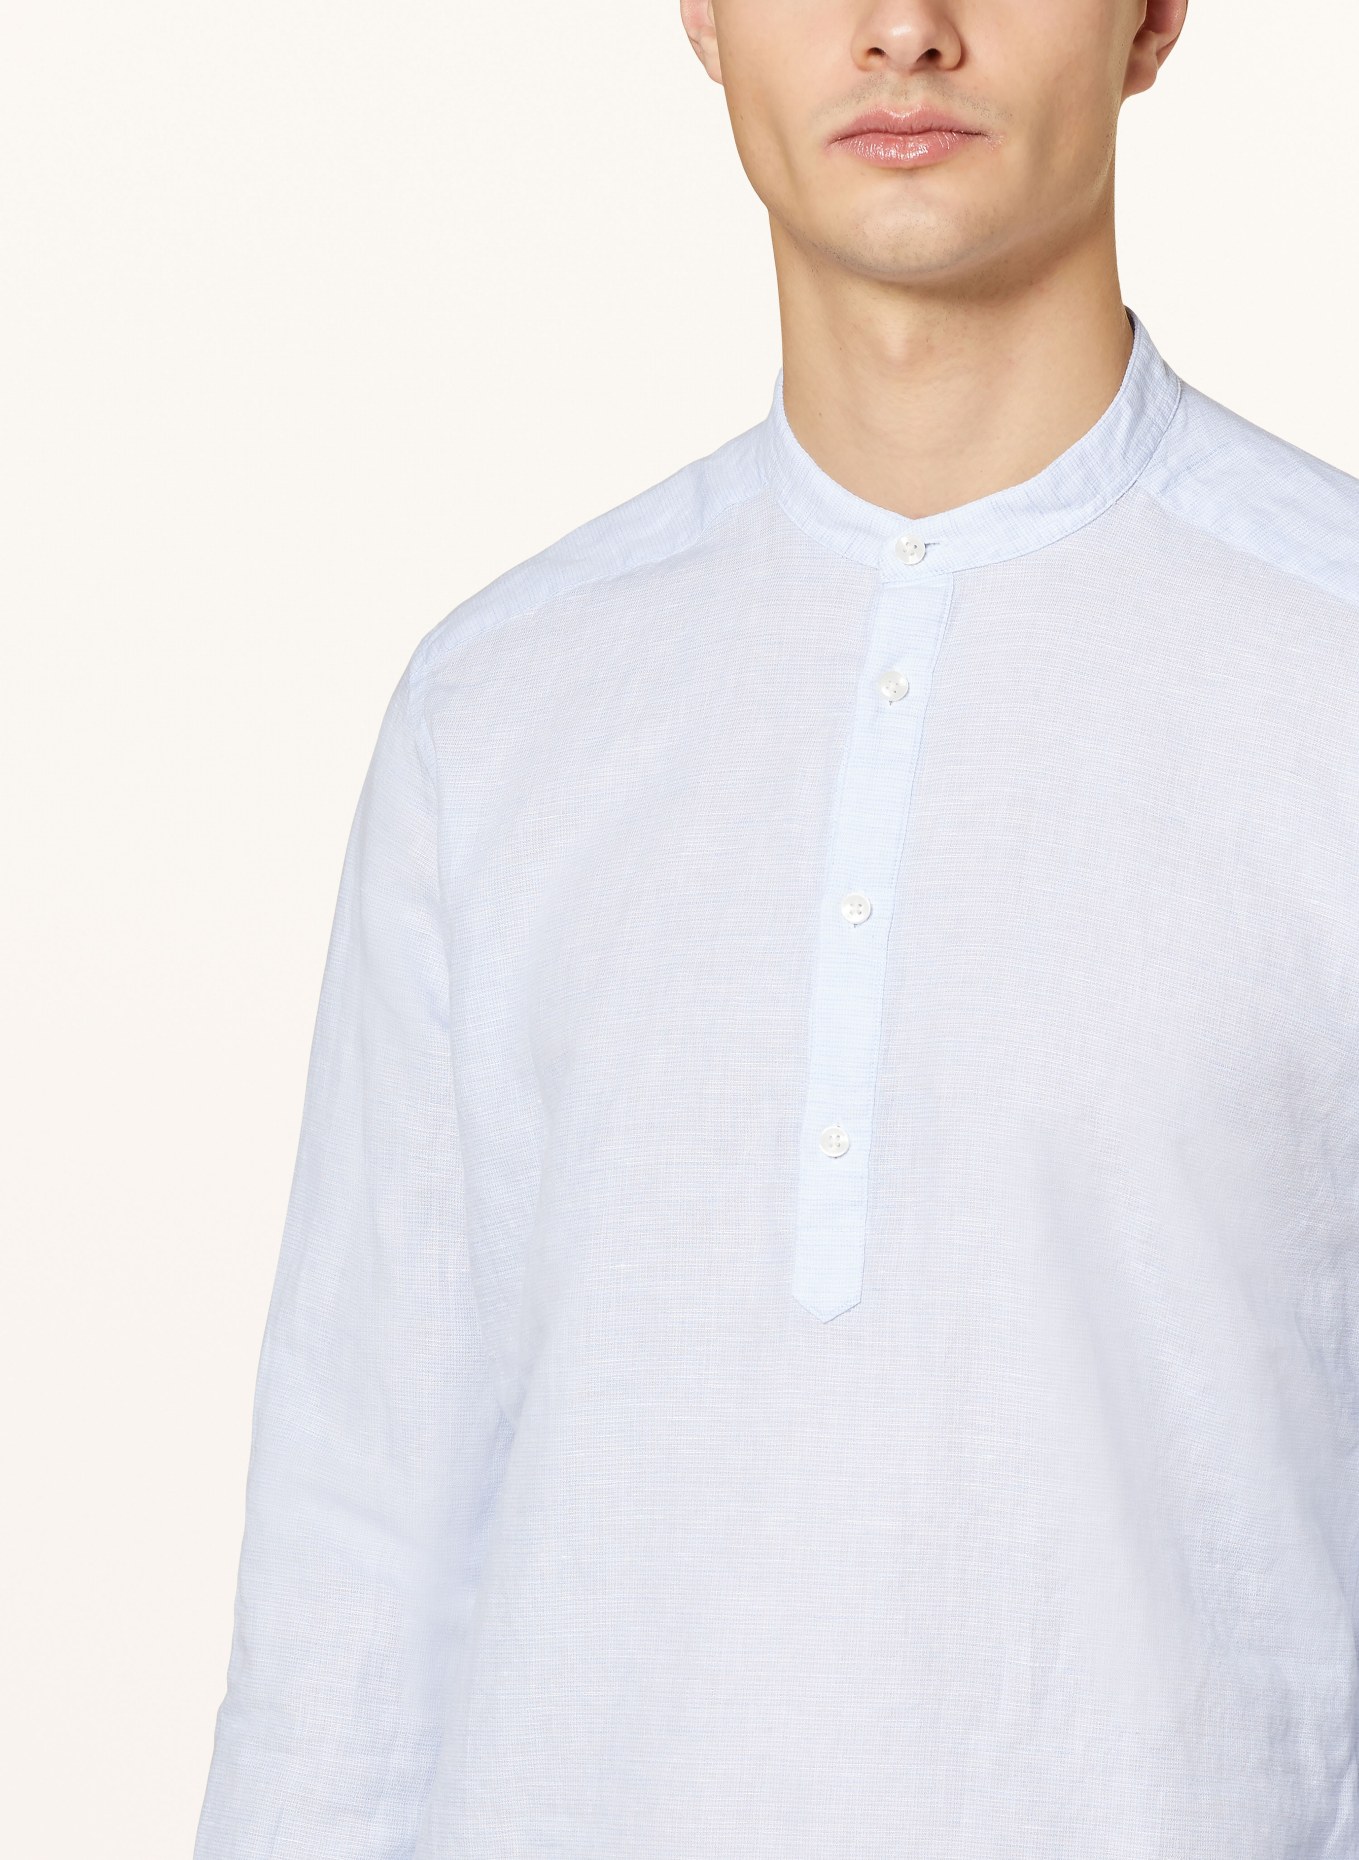 STROKESMAN'S Shirt regular fit with stand-up collar and linen, Color: LIGHT BLUE (Image 4)